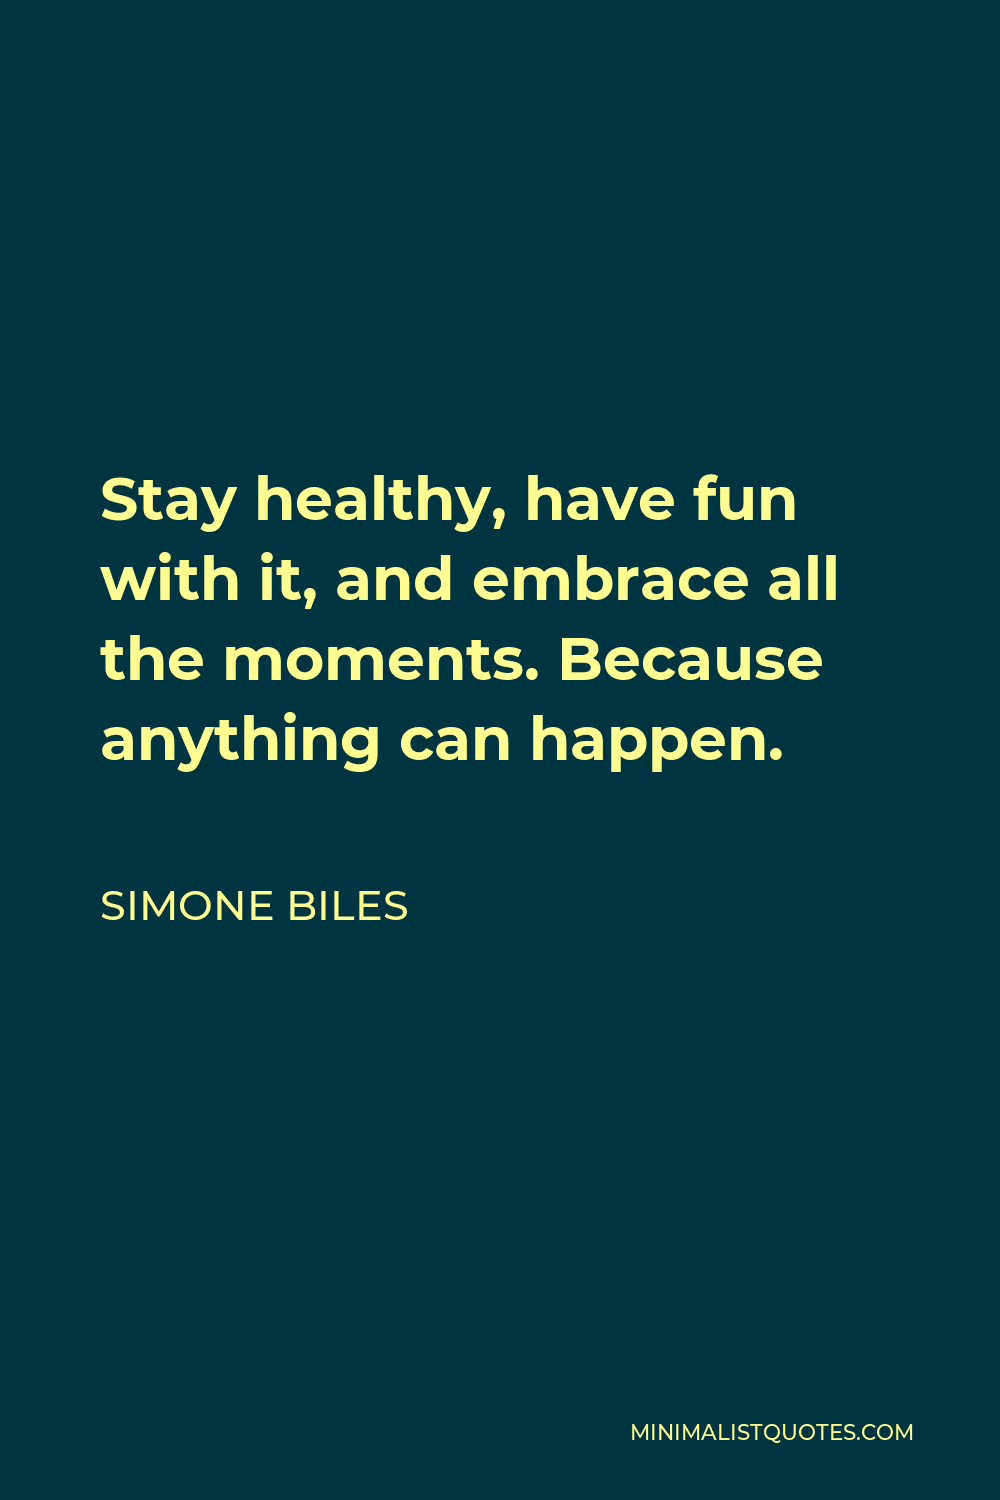 Simone Biles Quote - Stay healthy, have fun with it, and embrace all the moments. Because anything can happen.